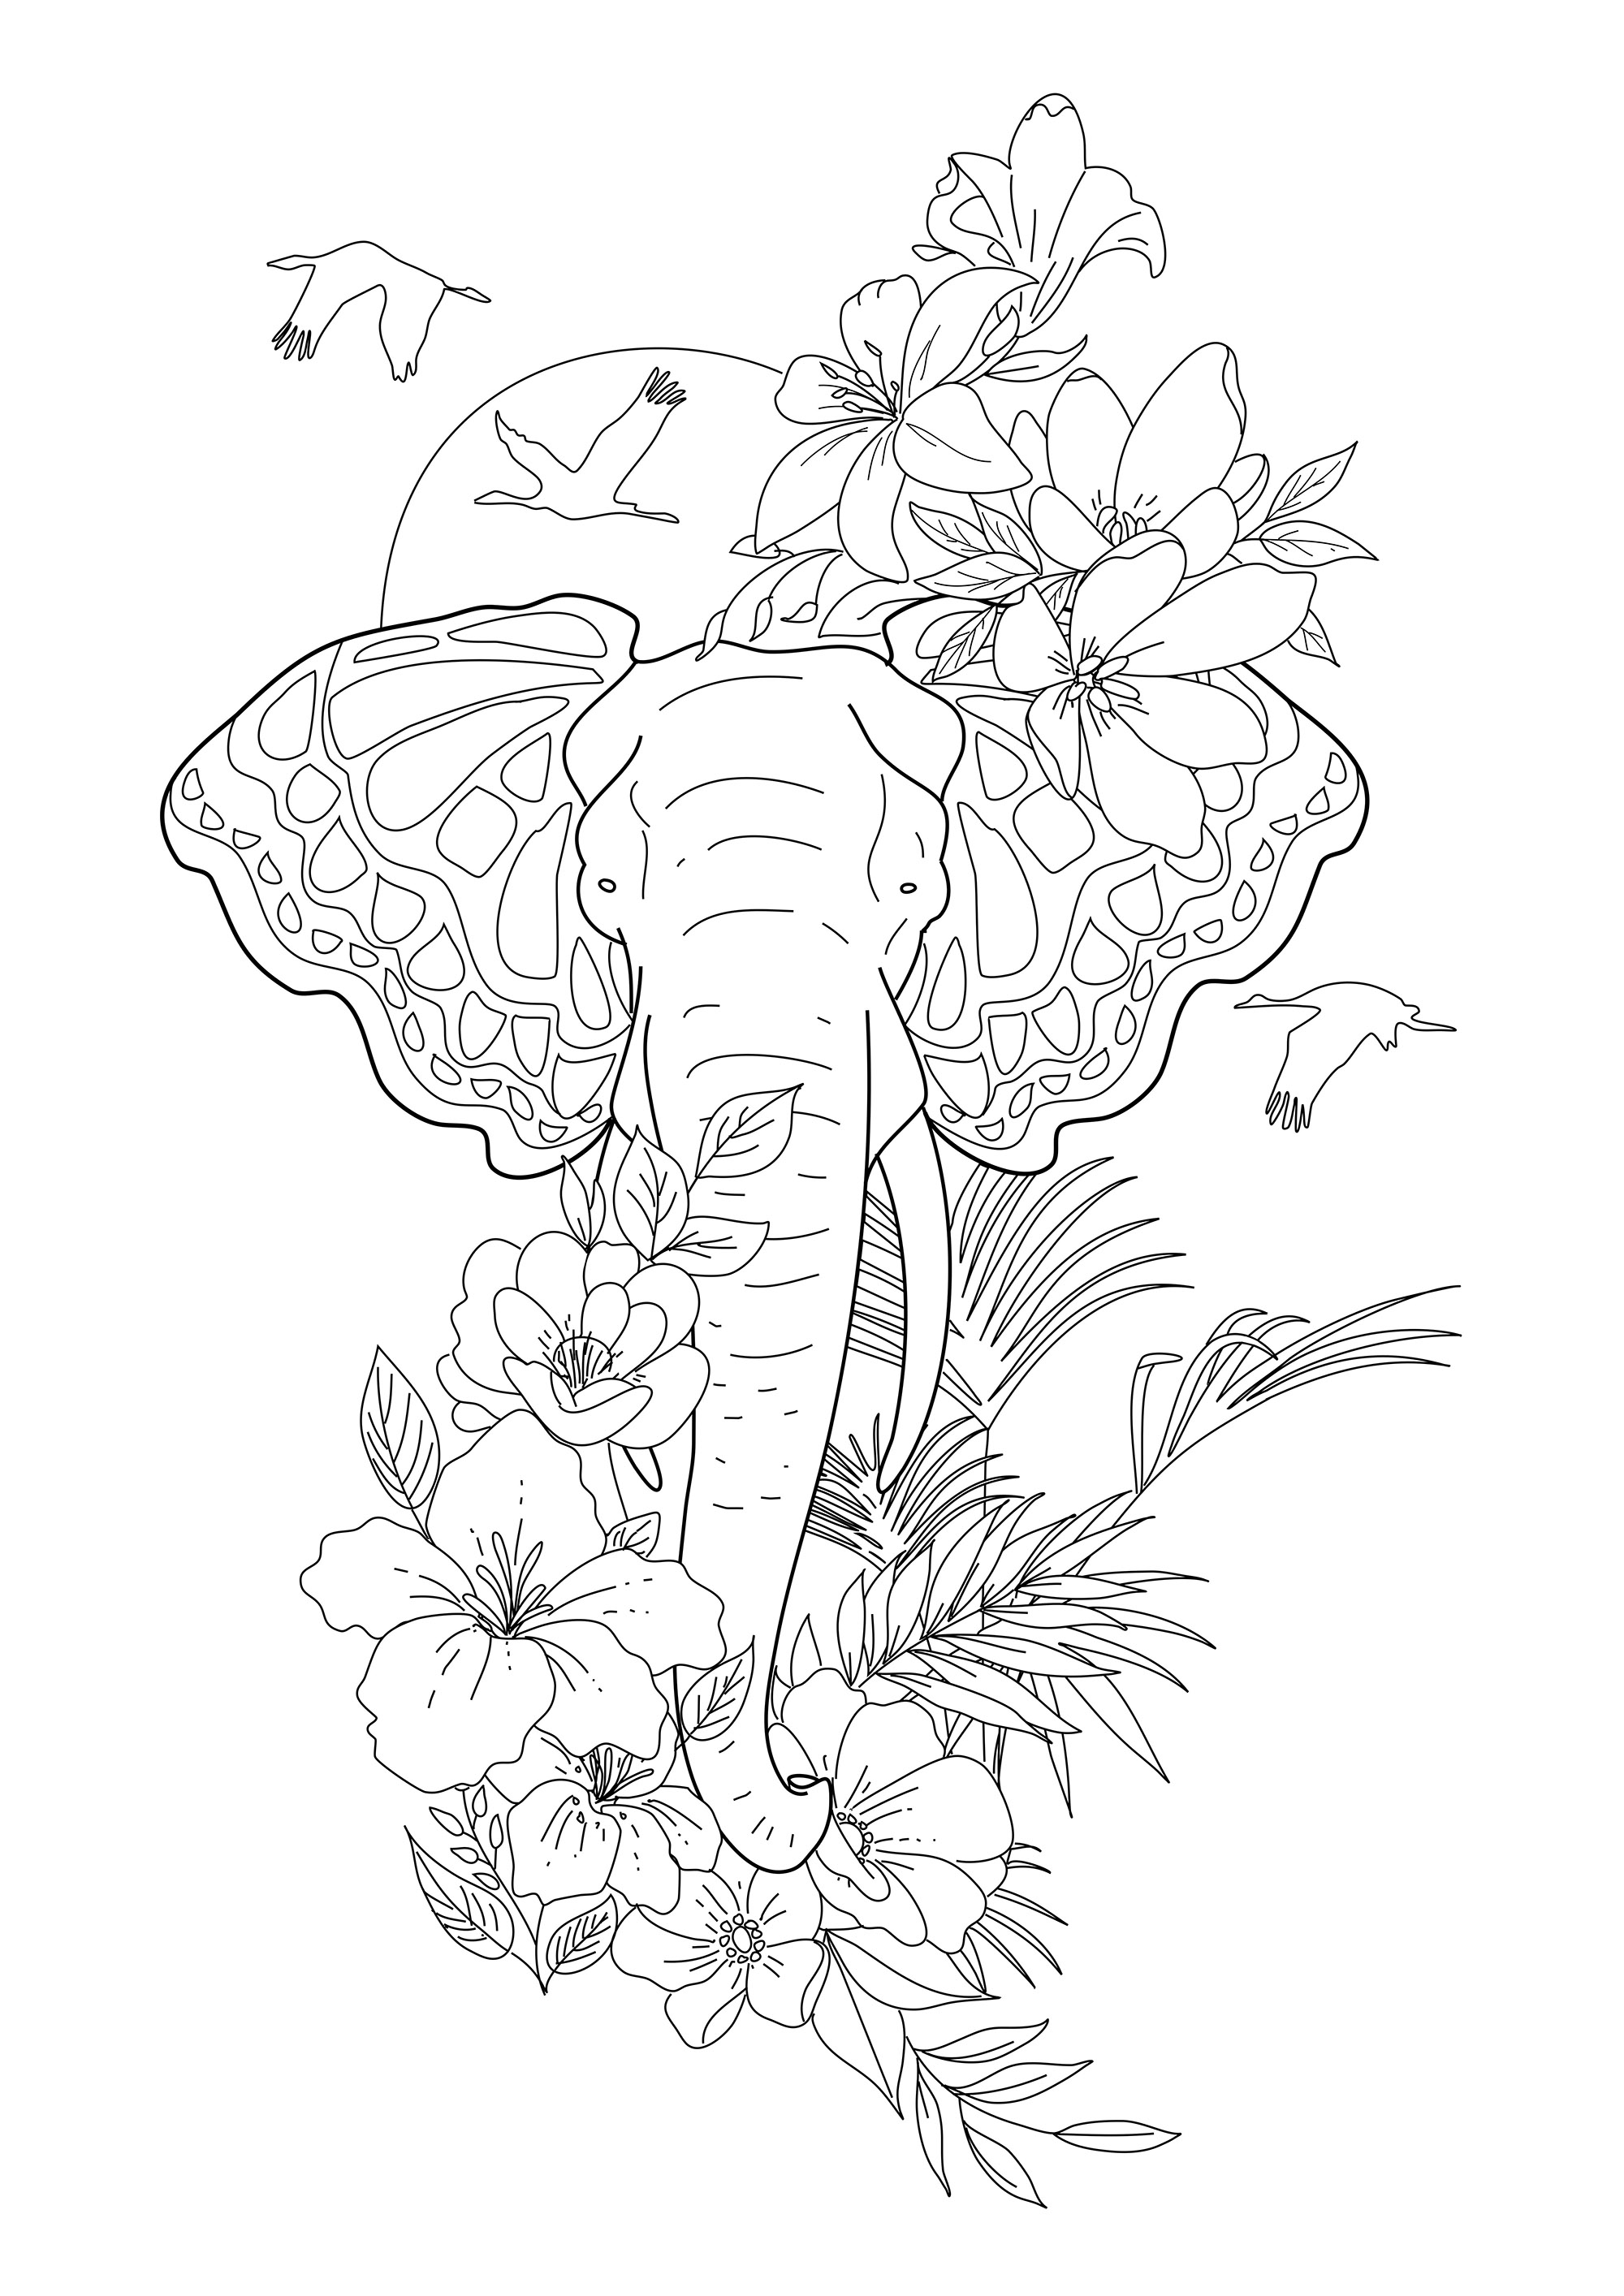 Elephant, flowers and birds. The pachyderm's ears represent butterfly wings! Excerpt from 'Realistic Tattoos Coloring Book' by Roberto 'Gi. Erre' Gemori  More information: coloringbook.pictures/index.html  Author's website: Tattootribes.com, Artist : Roberto Gemori